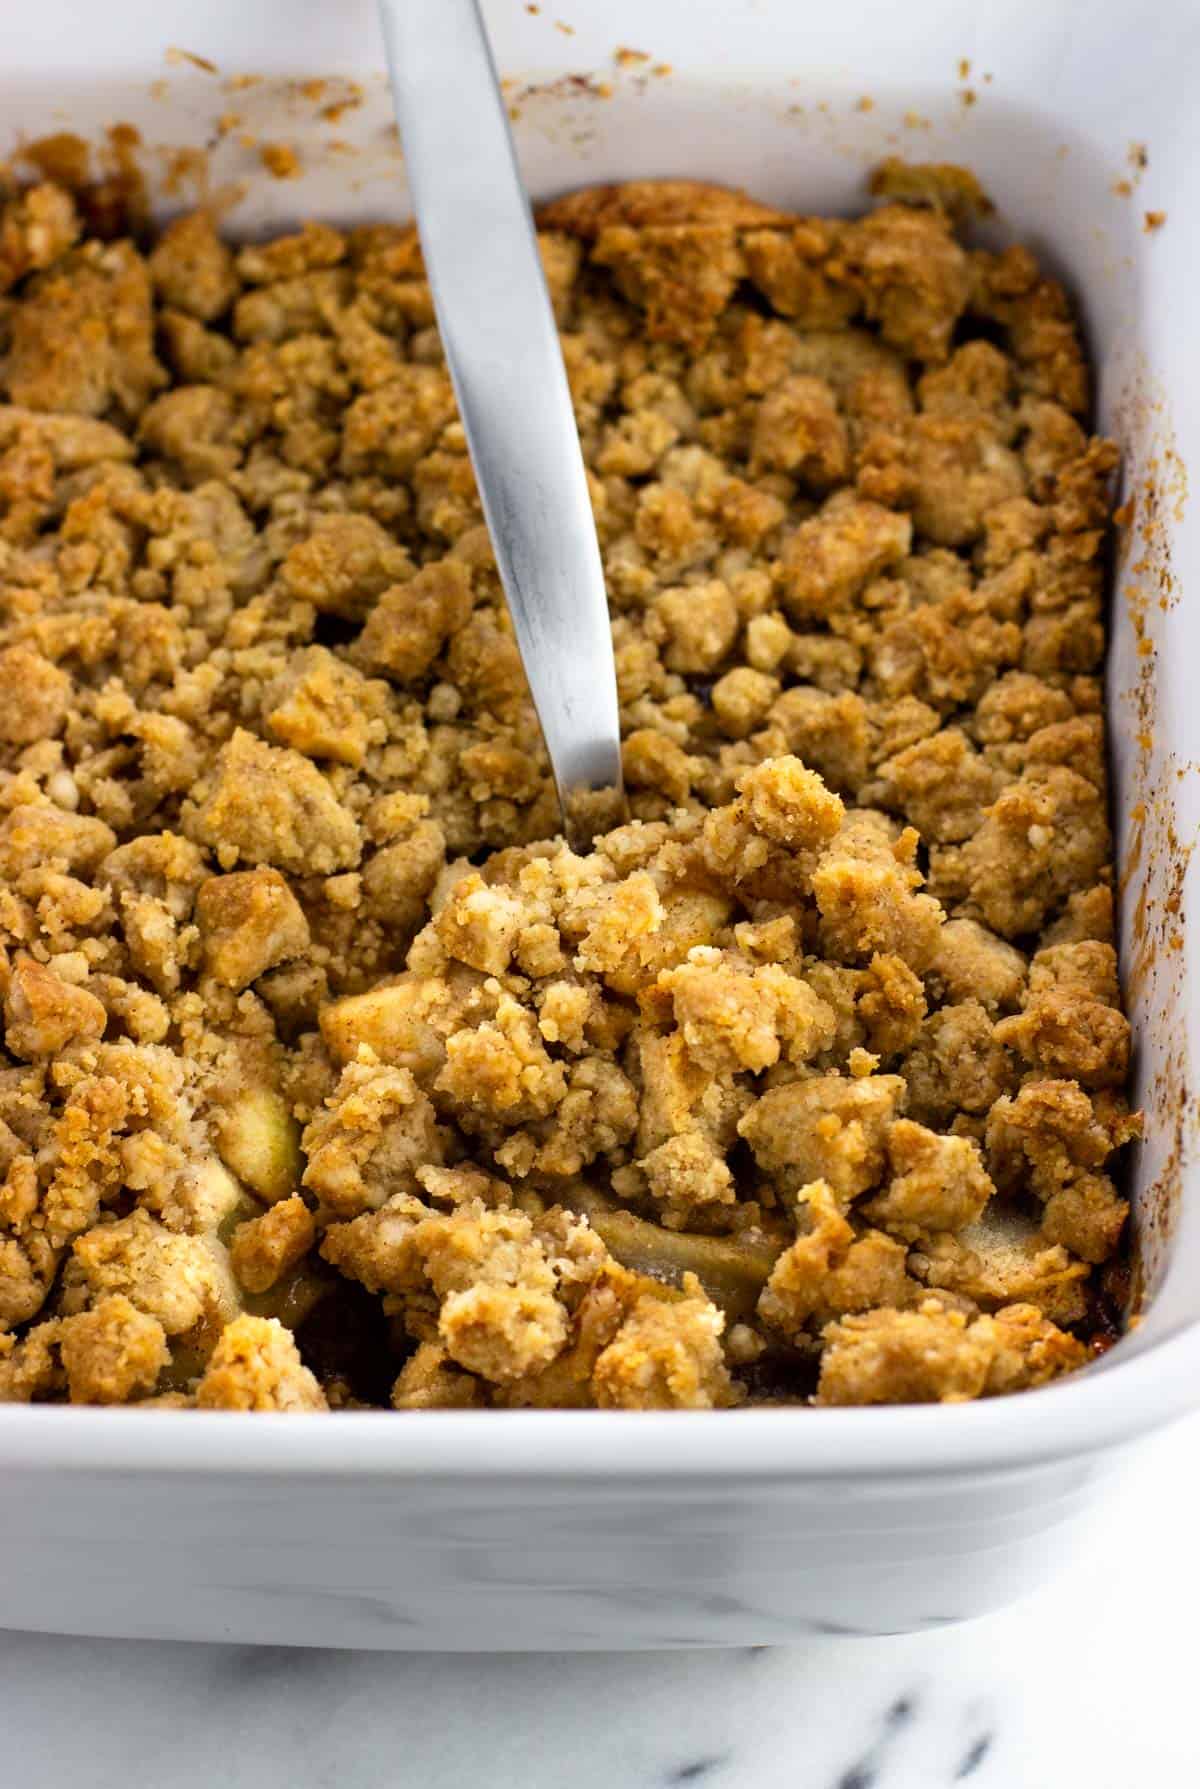 A pan of apple crumble with a serving spoon scooping a portion.